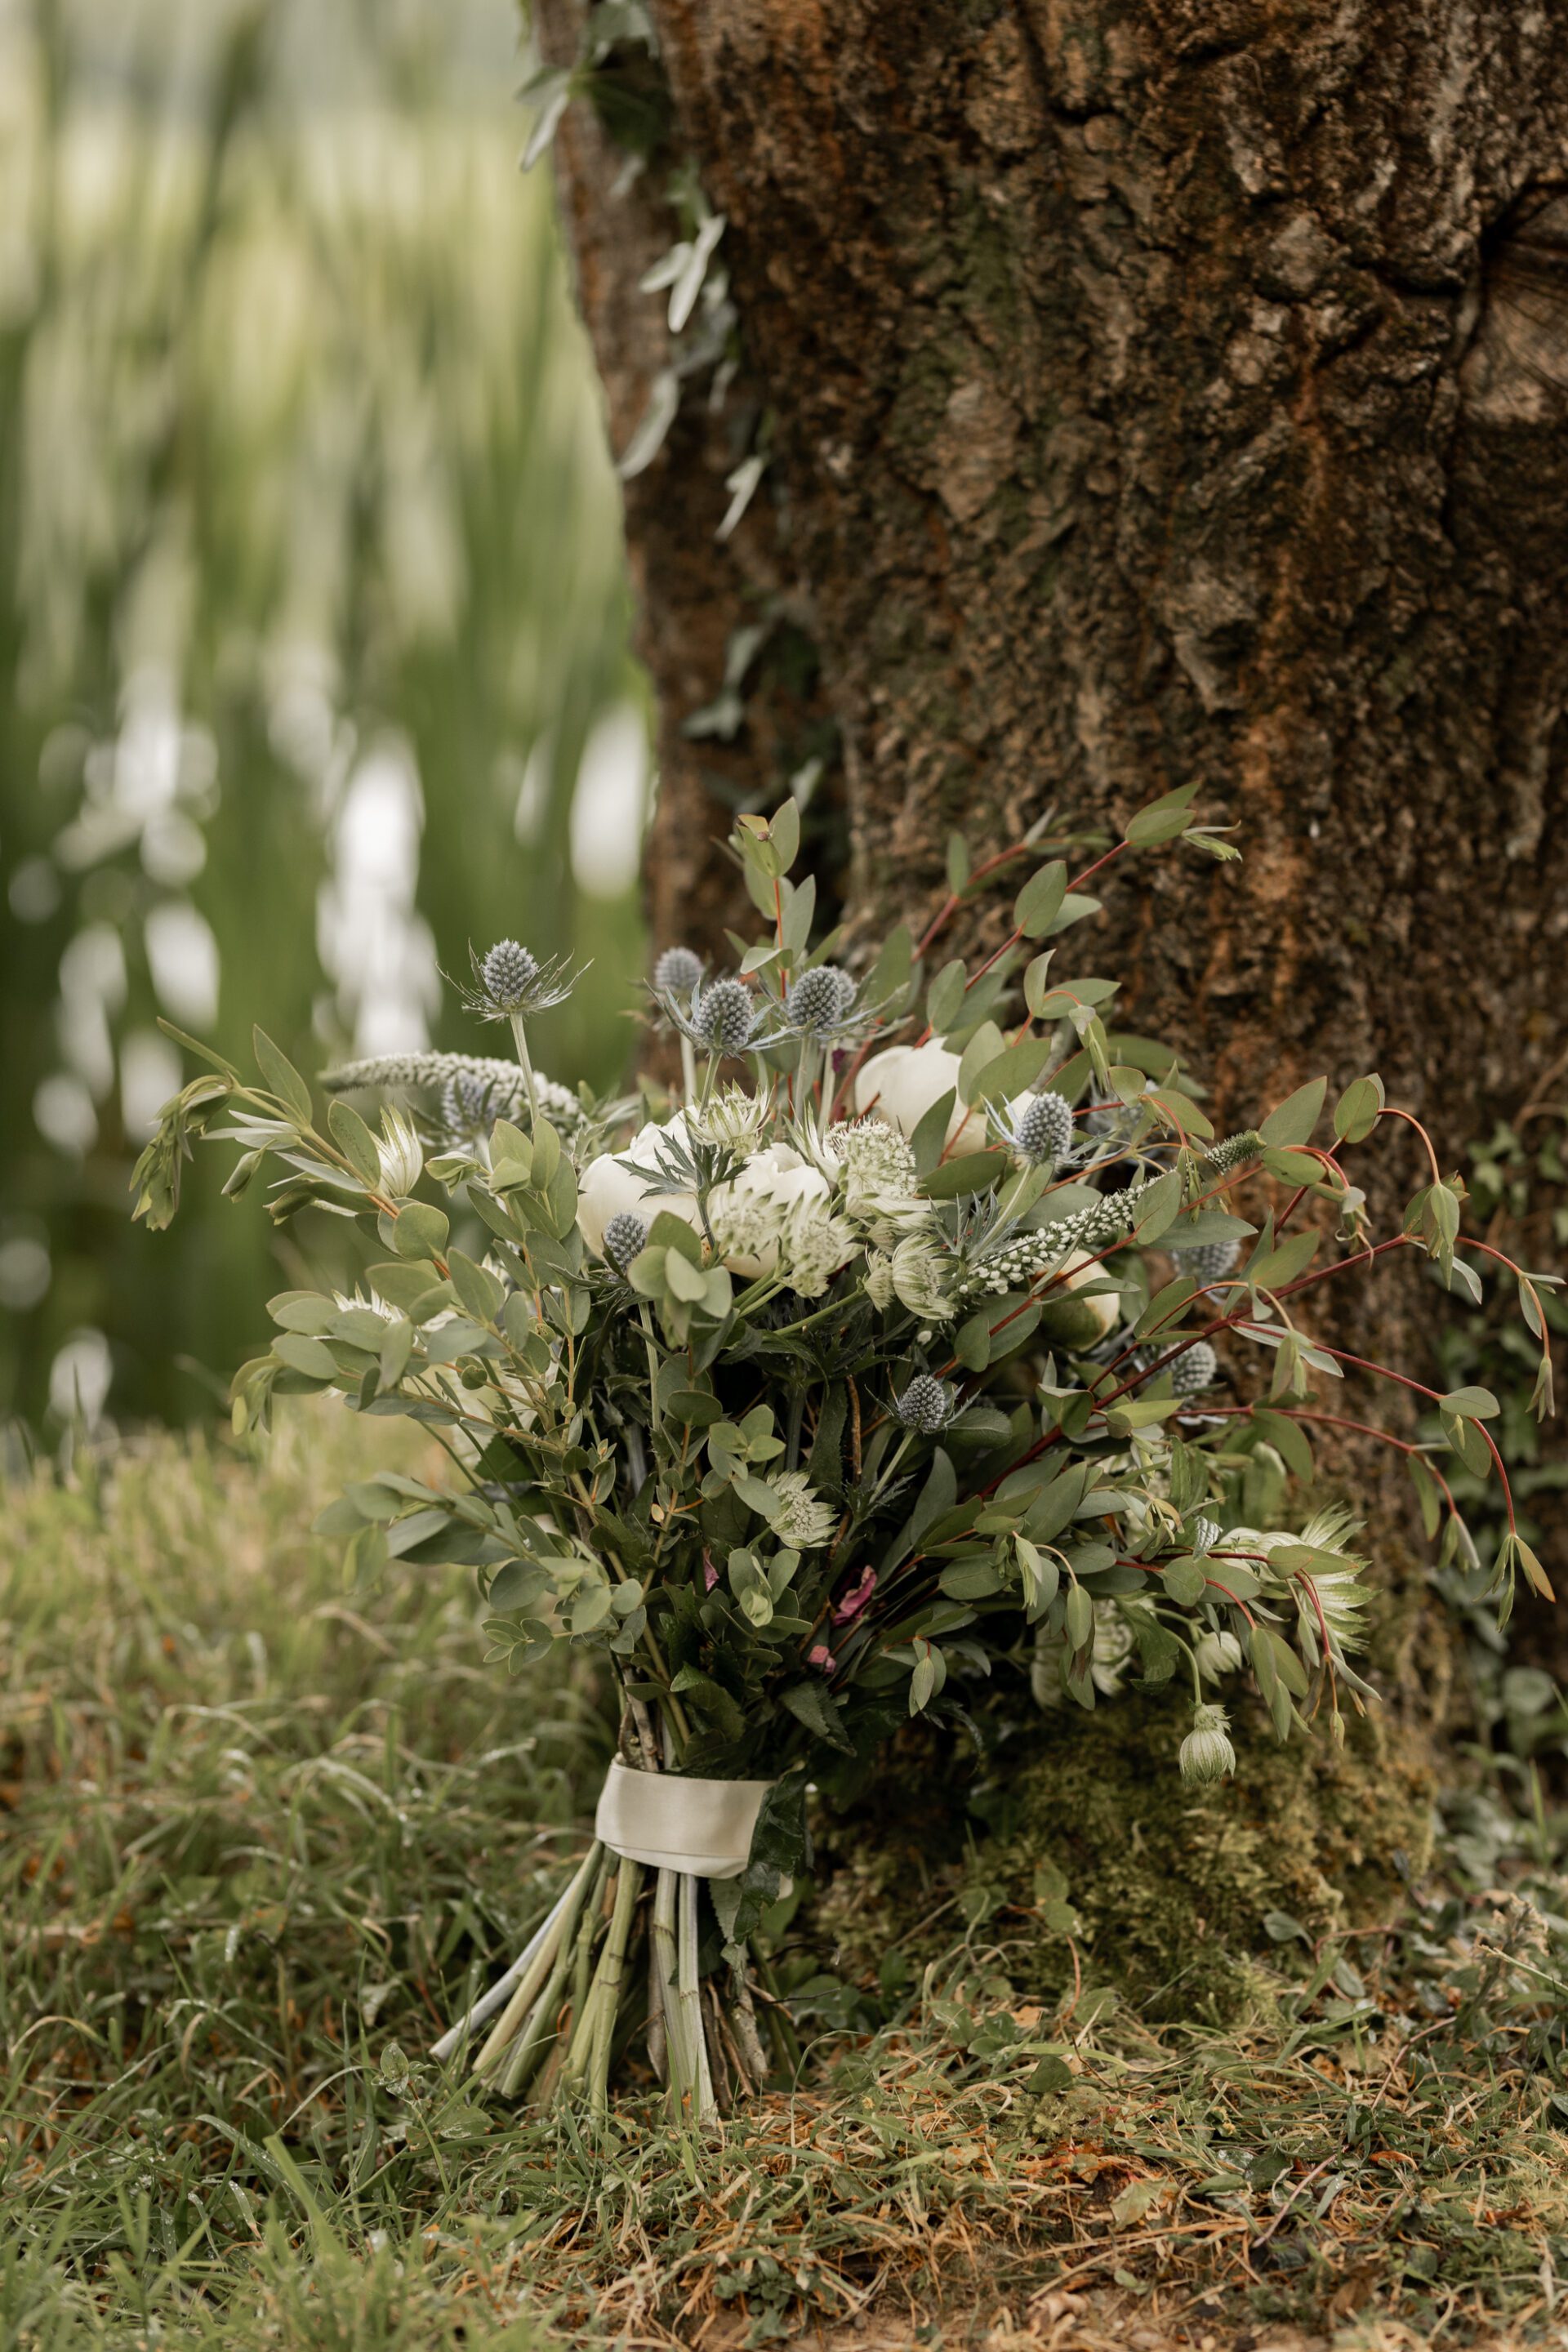 The bride's beautiful classic bouquet was created by the Devon Cottage Gardener